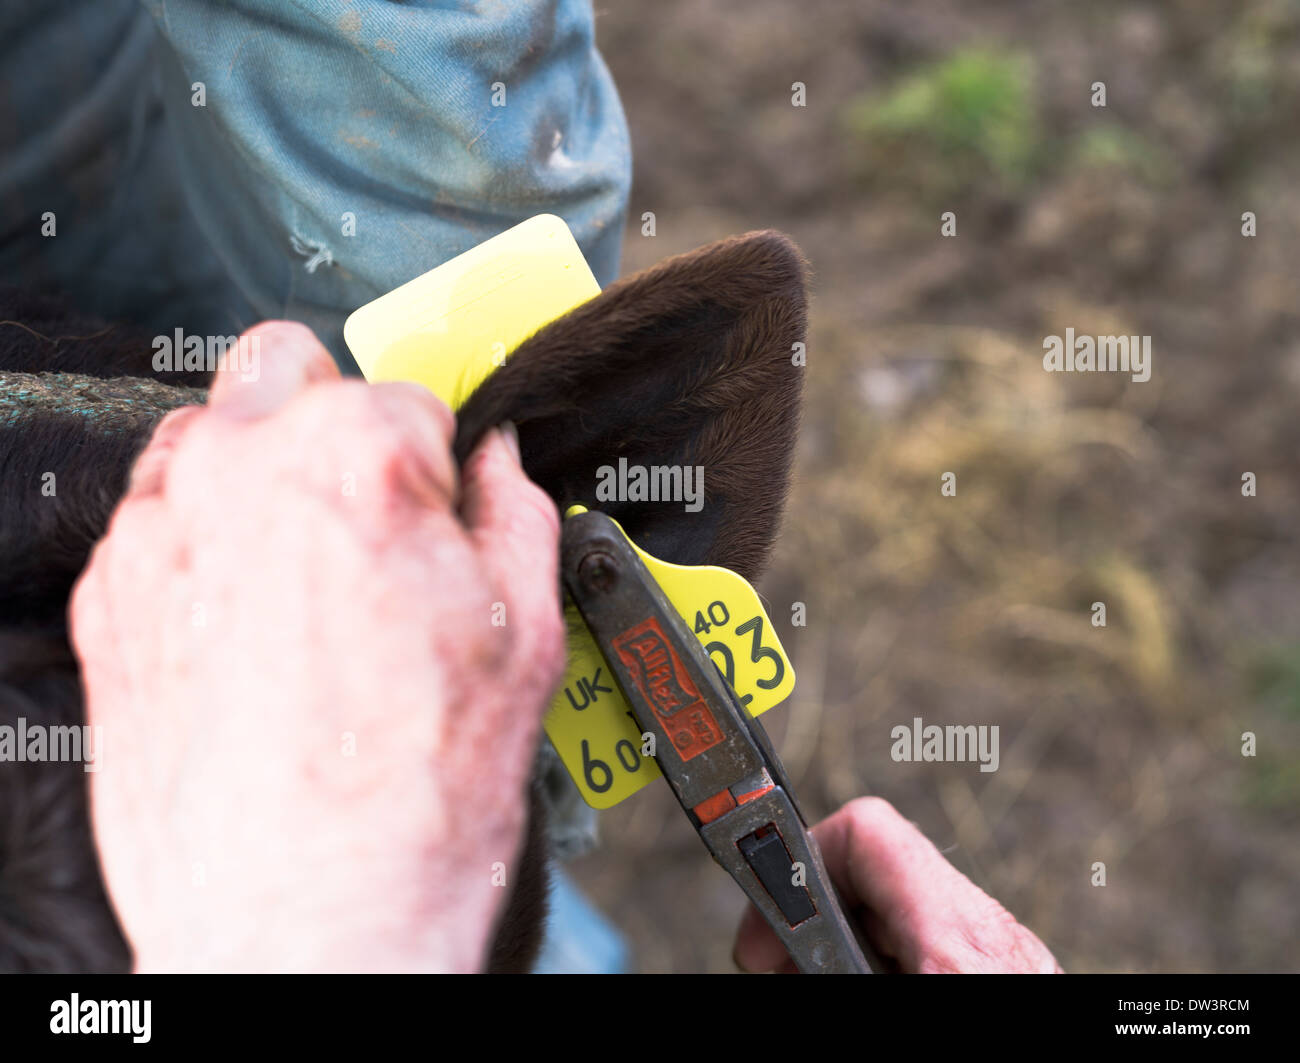 dh  CATTLE UK Tagging calf ear with tracking indentity id tag tagged animal cow tags Stock Photo